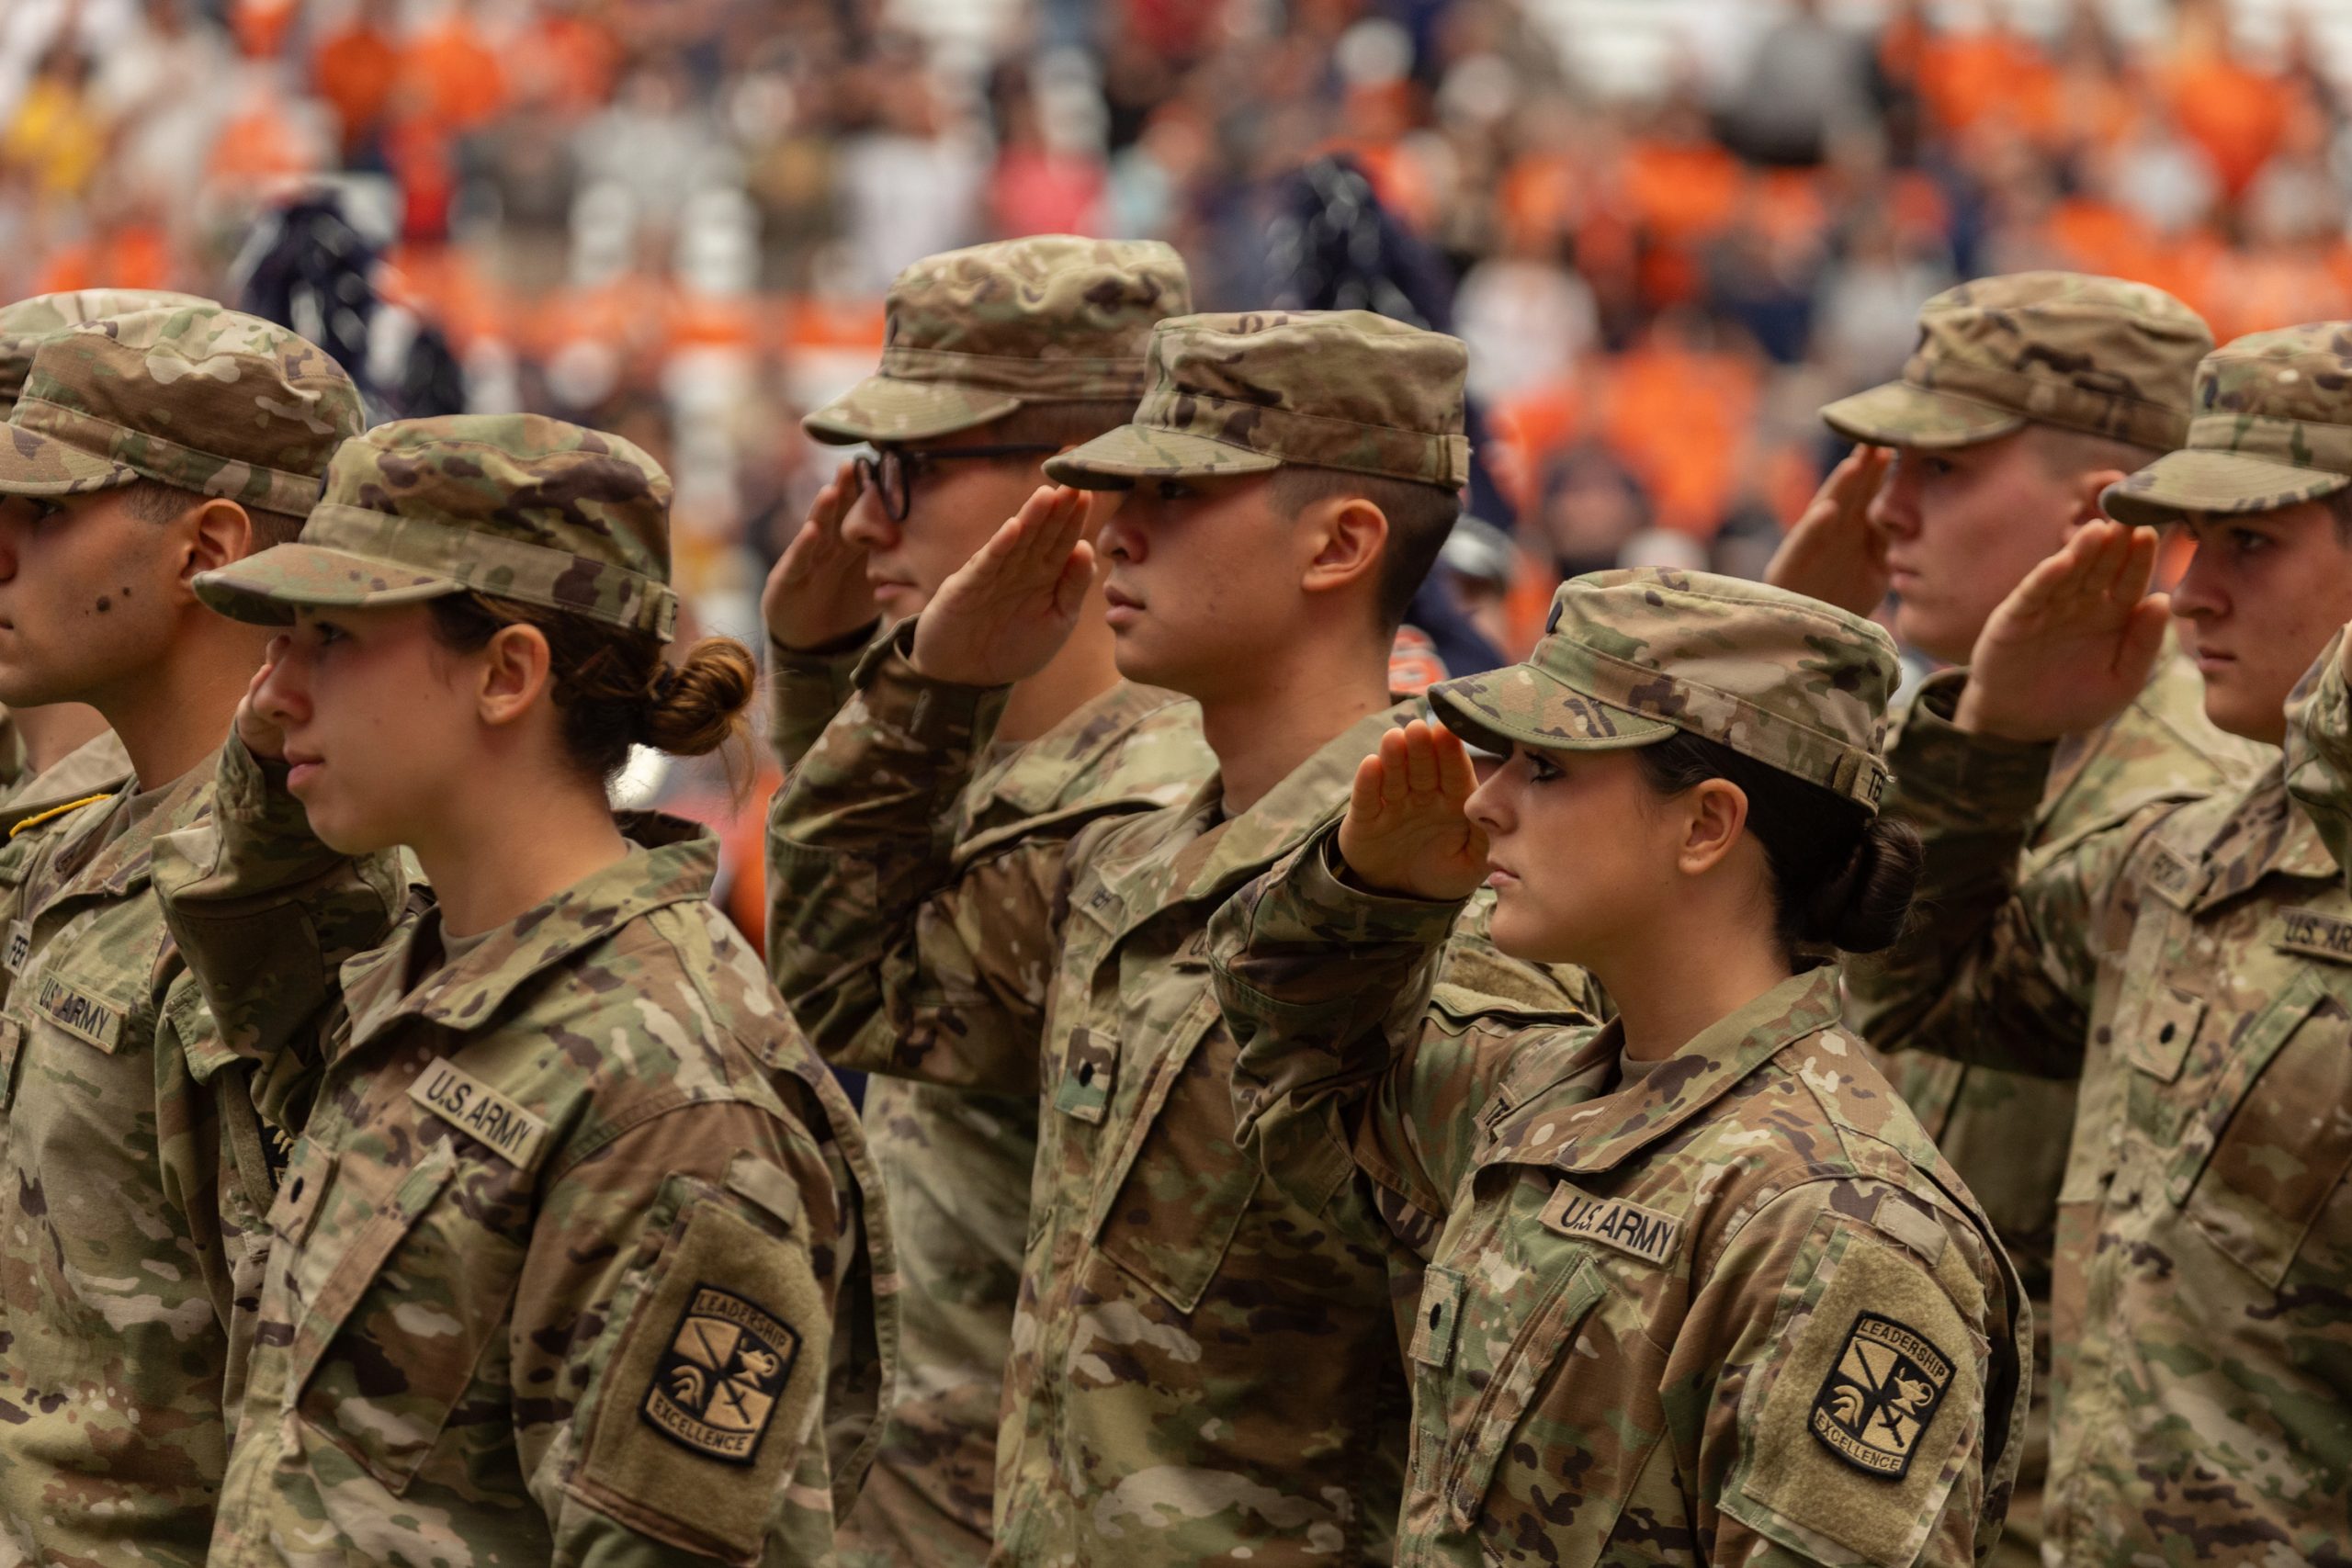 Individuals in military uniforms saluting. 